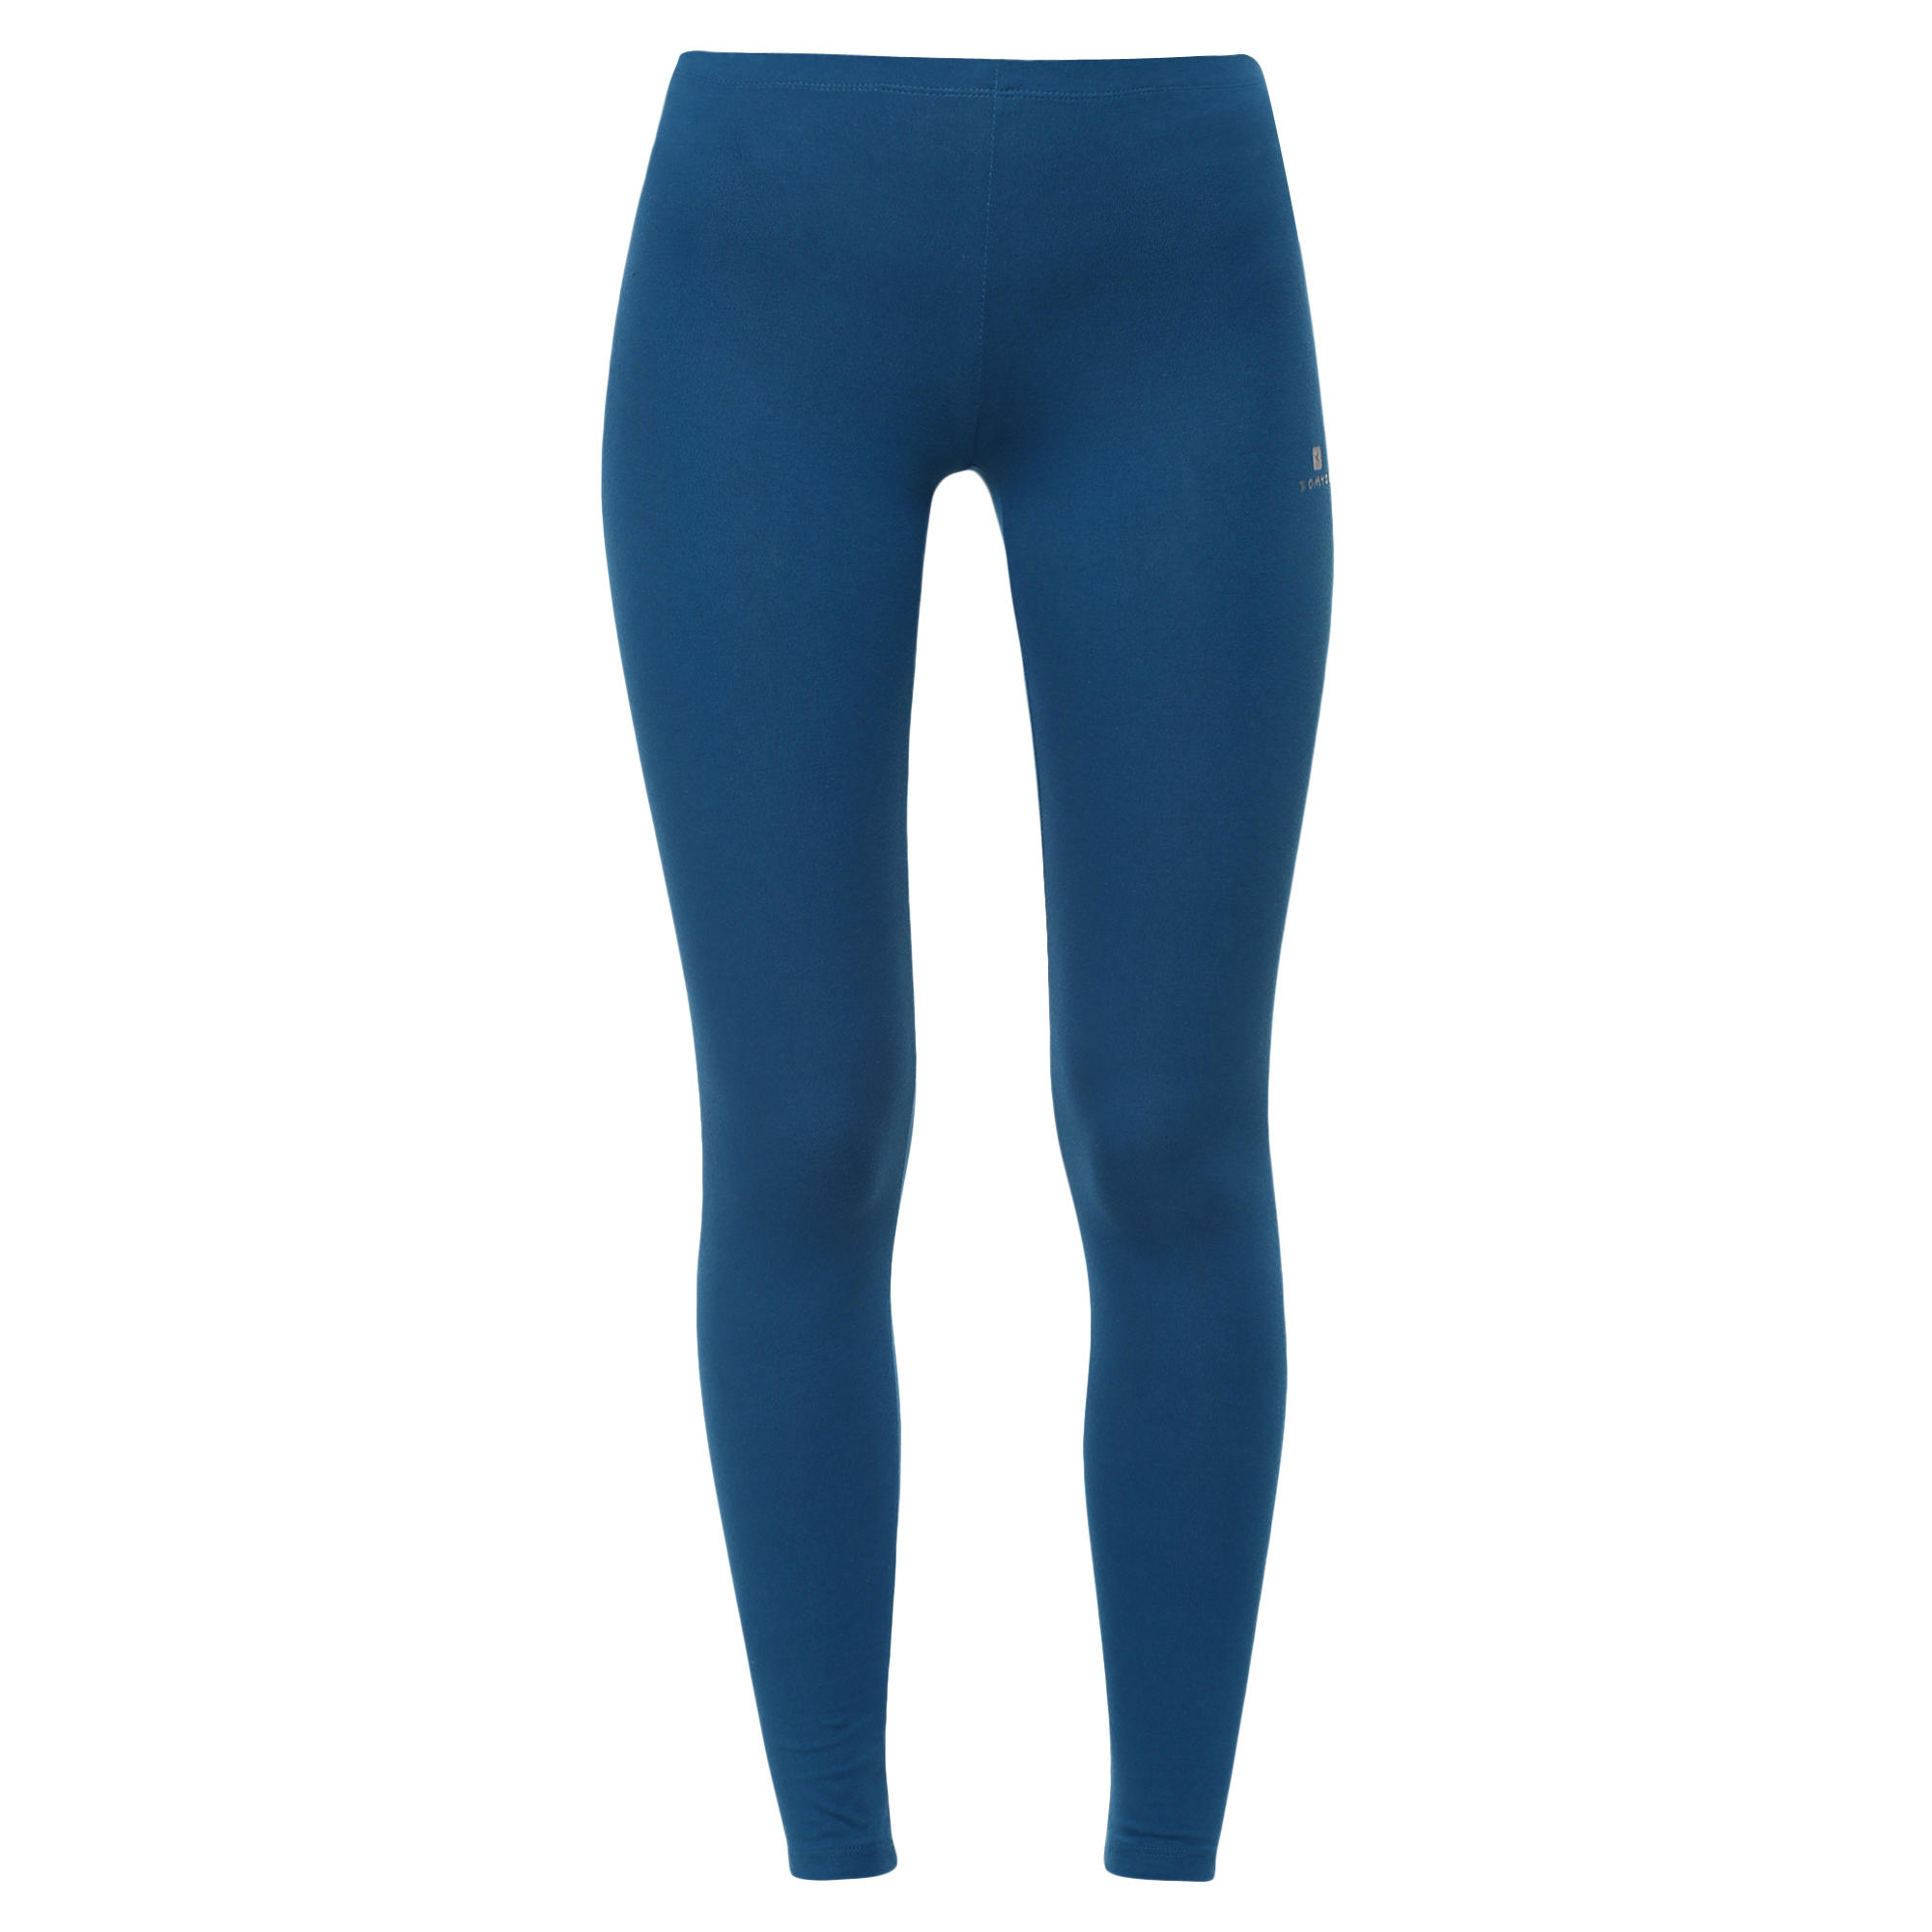 Authentic Leggings Navy – yuly360